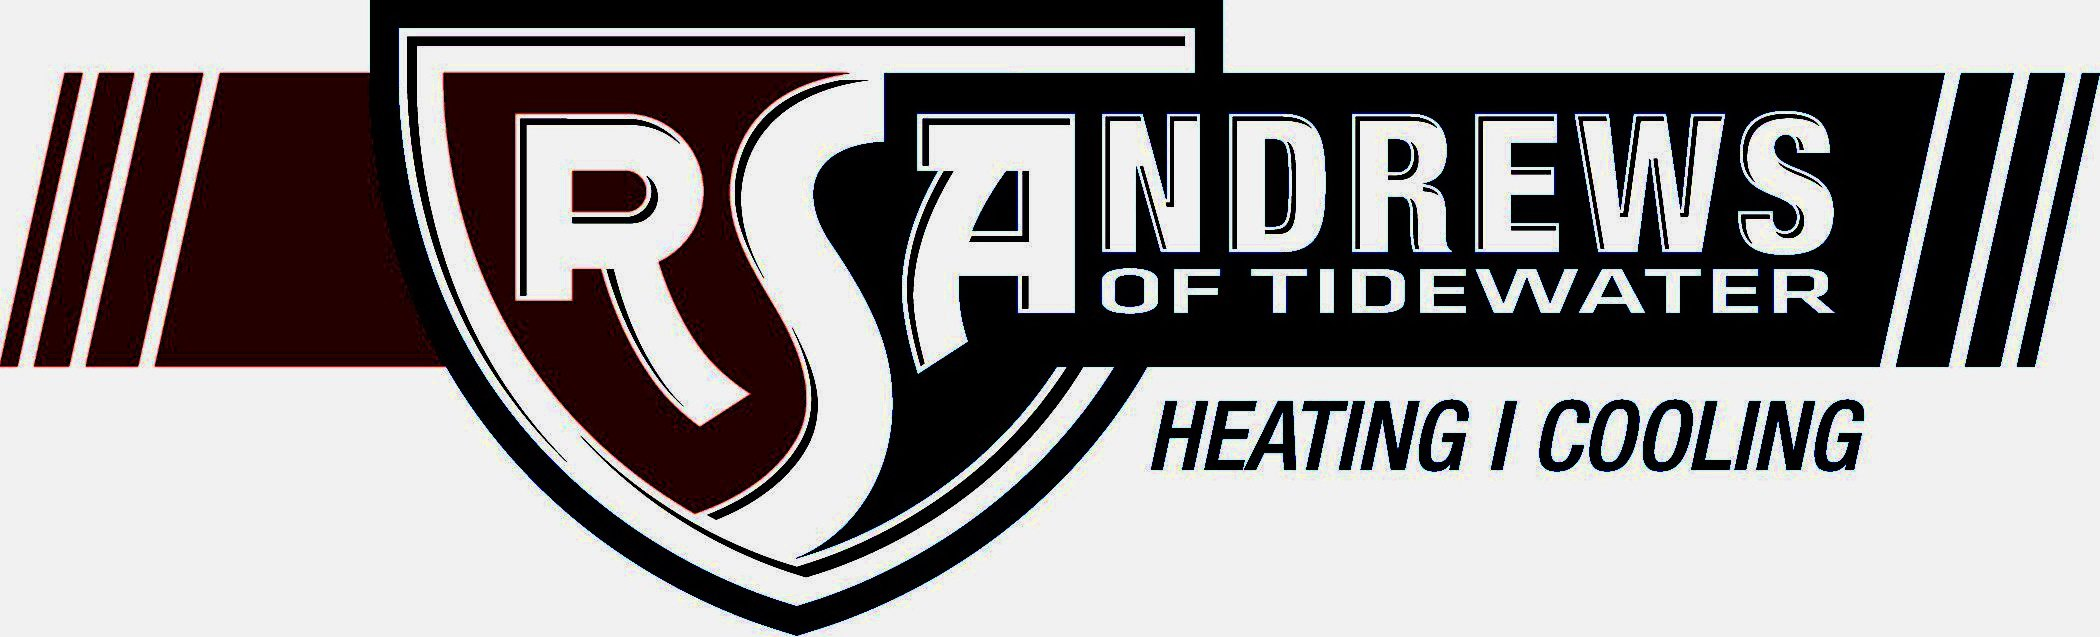  RS ANDREWS OF TIDEWATER HEATING / COOLING